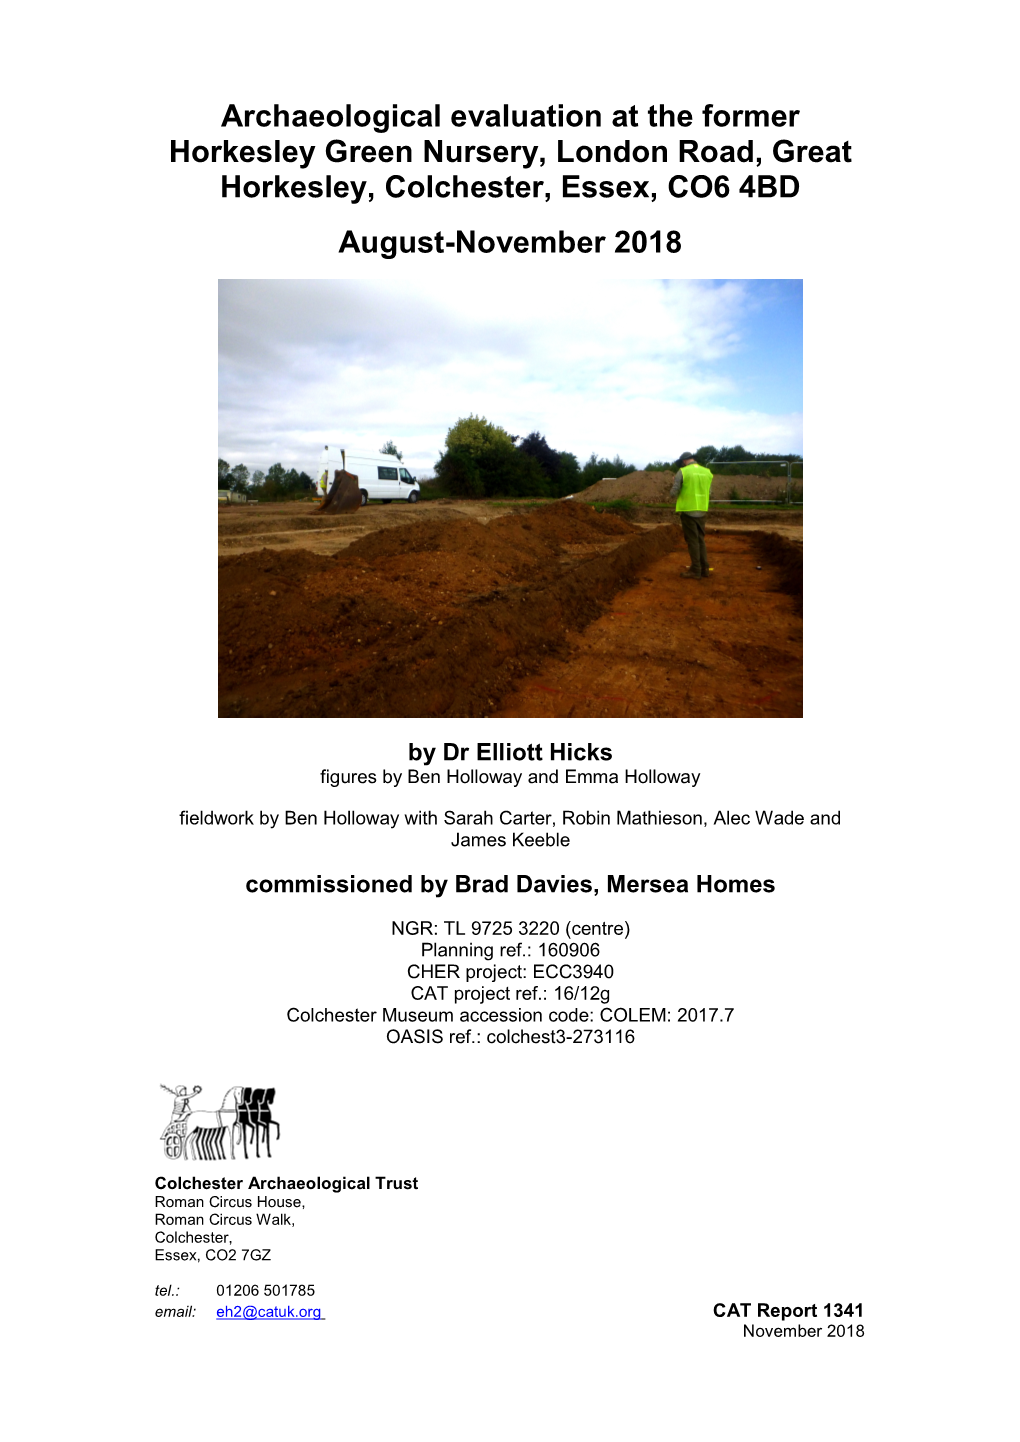 Archaeological Evaluation at the Former Horkesley Green Nursery, London Road, Great Horkesley, Colchester, Essex, CO6 4BD